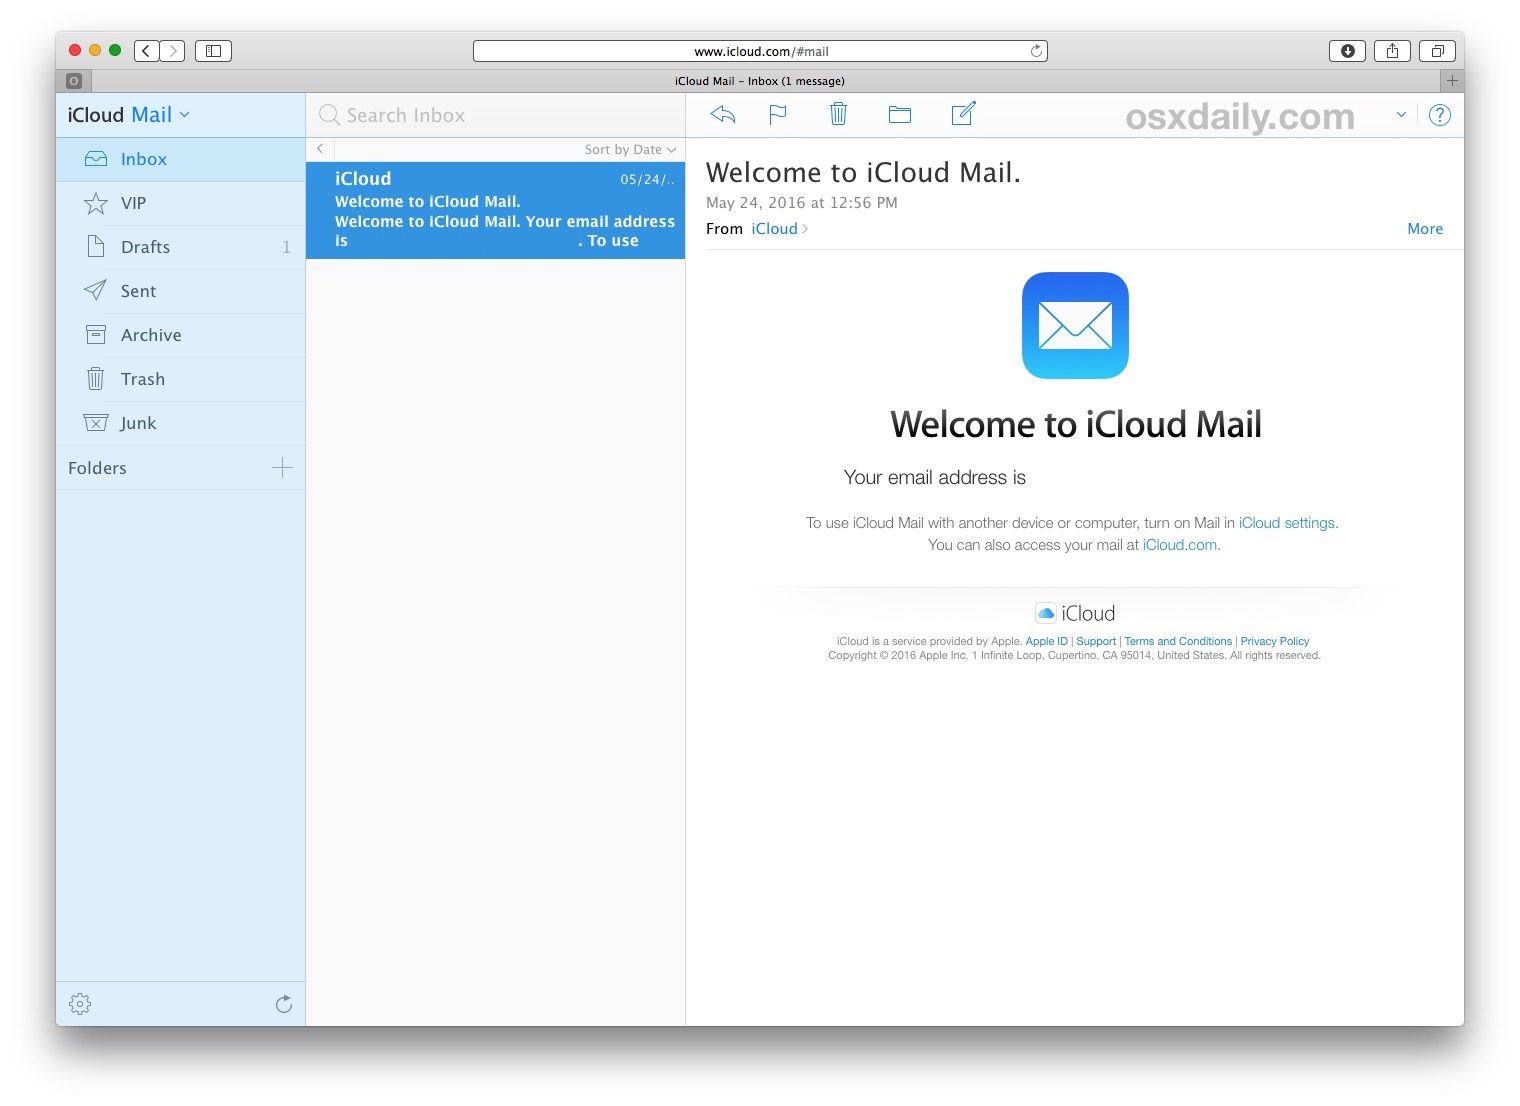 How to Import OLM to iCloud using IMAP to Transfer Emails ...